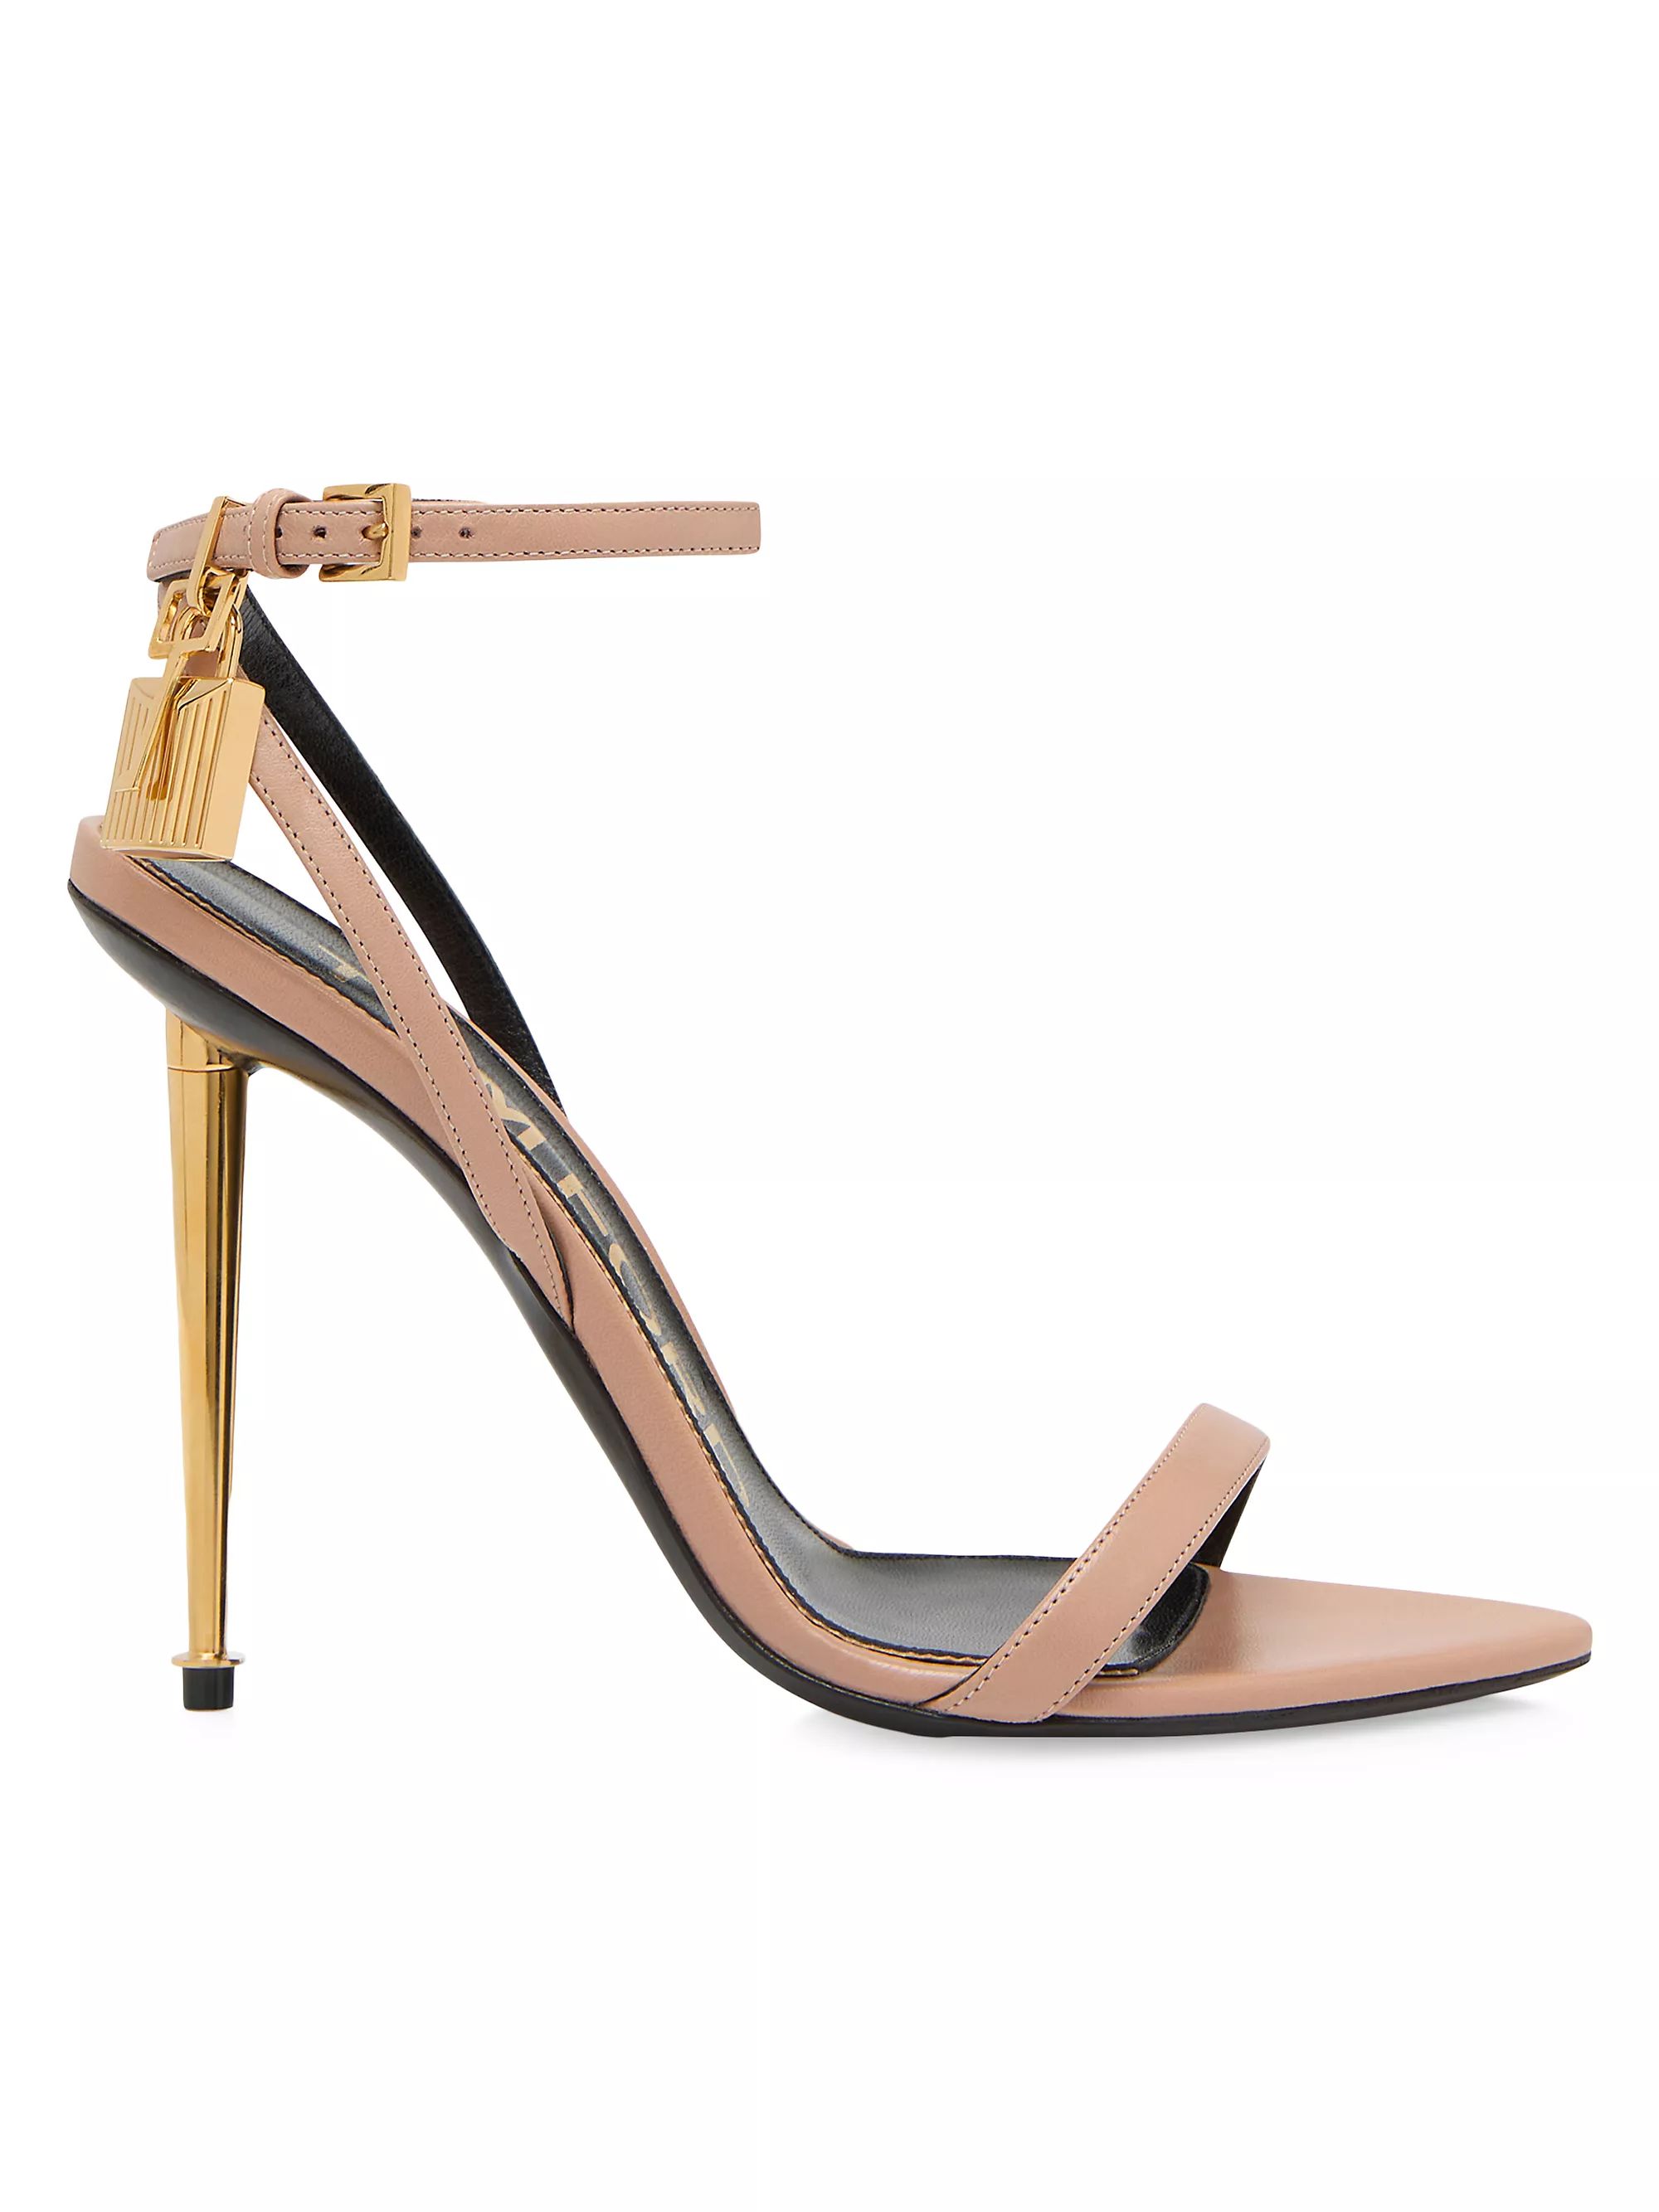 Naked 105 Leather Ankle-Strap Sandals | Saks Fifth Avenue